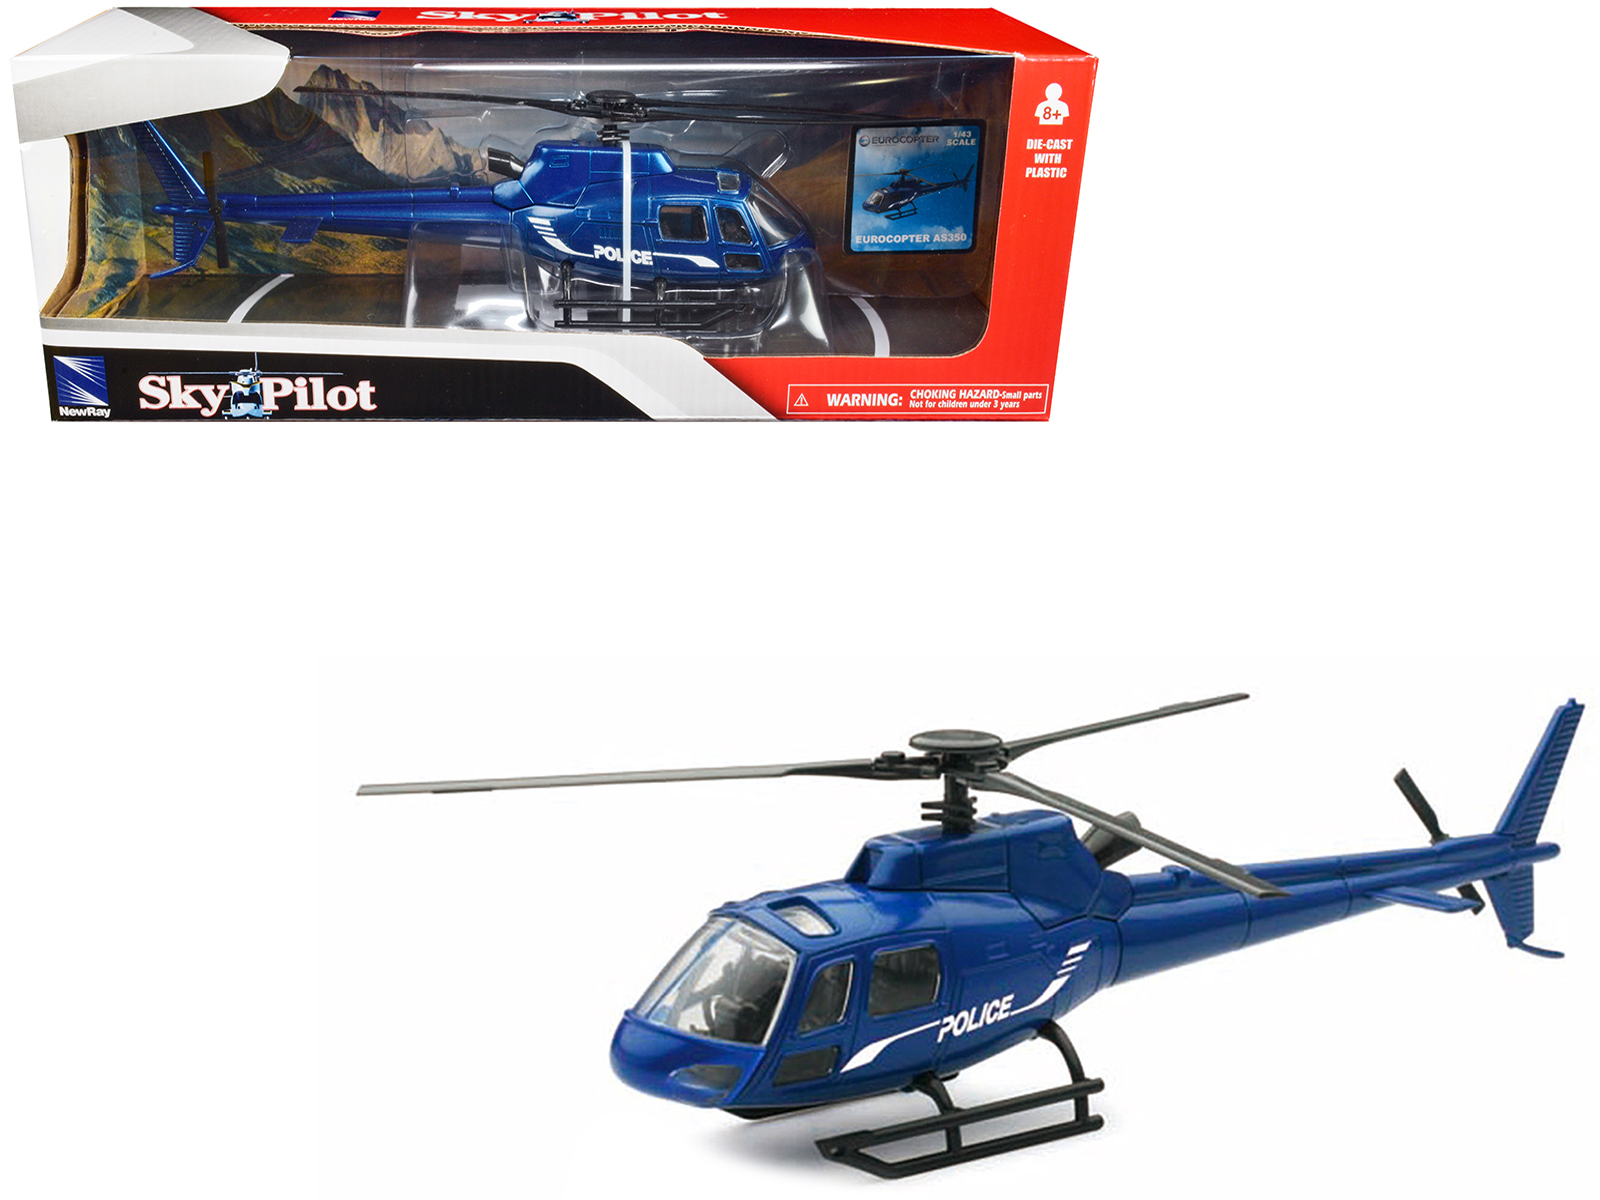 New Ray Eurocopter AS350 Helicopter Blue Metallic "Police" "Sky Pilot" Series 1/43 Diecast Model by New Ray